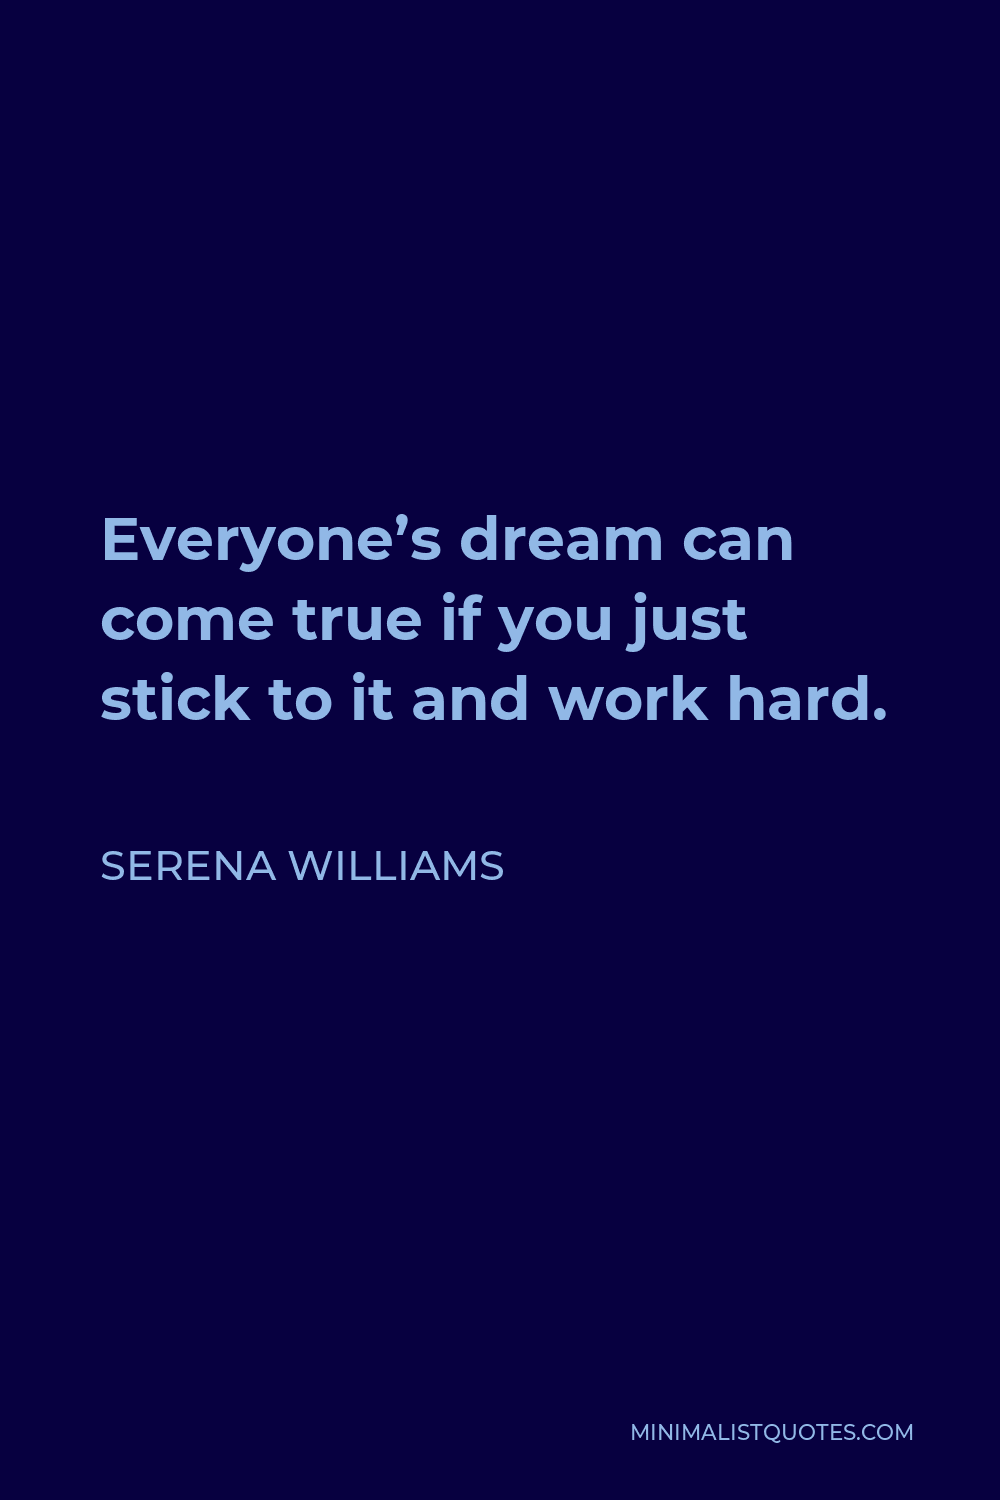 Serena Williams Quote - Everyone’s dream can come true if you just stick to it and work hard.